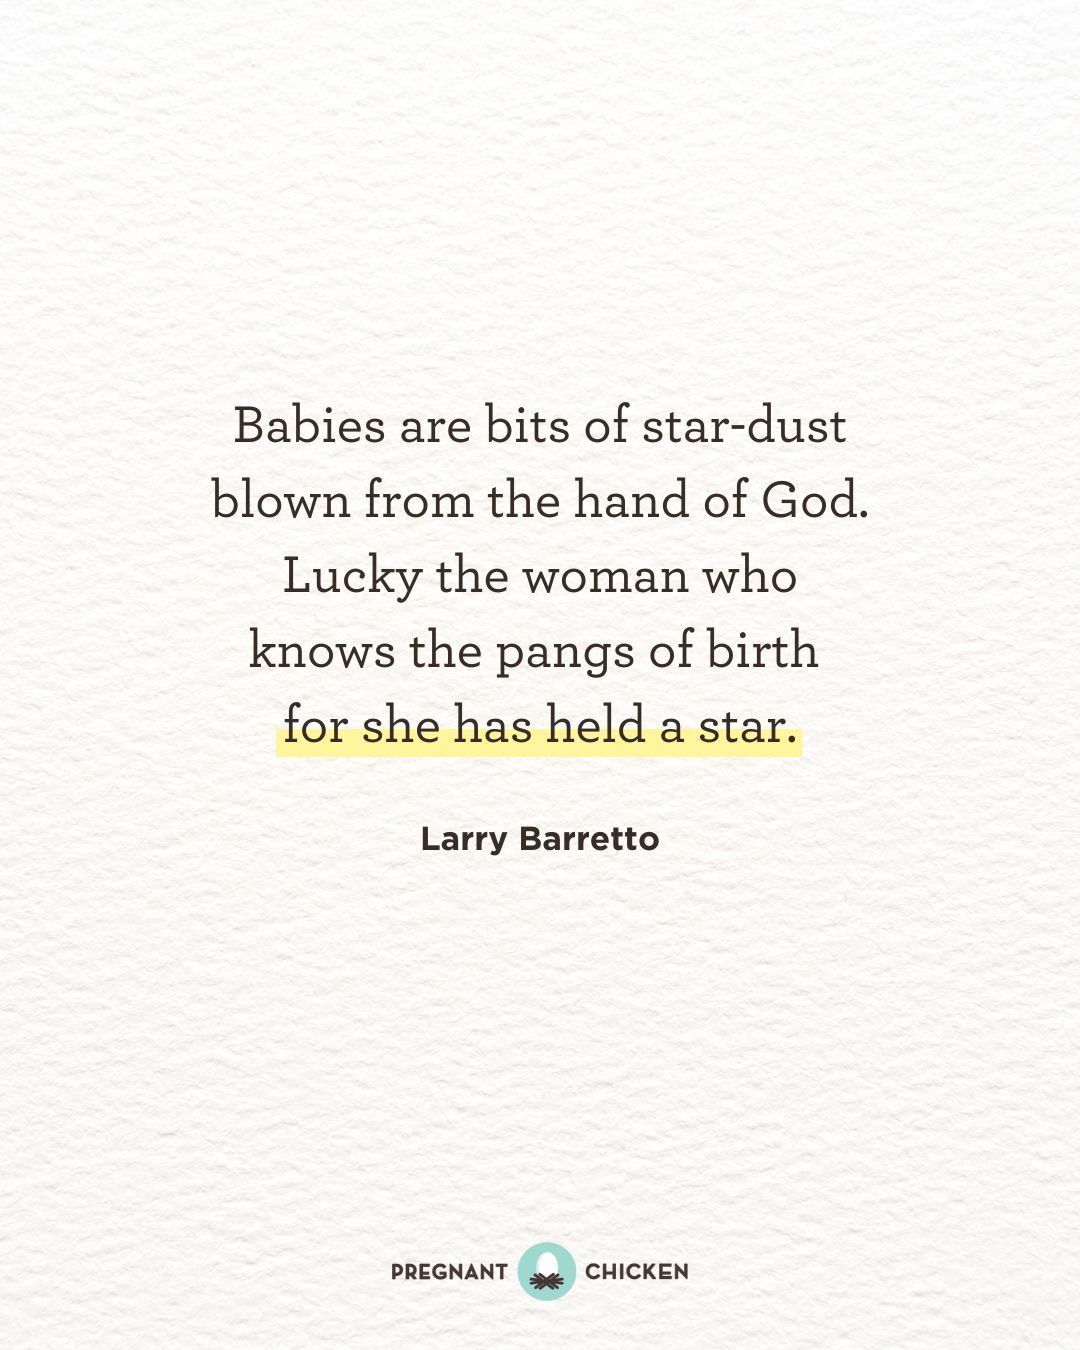 Babies are bits of star-dust blown from the hand of God. Lucky the woman who knows the pangs of birth  for she has held a star.